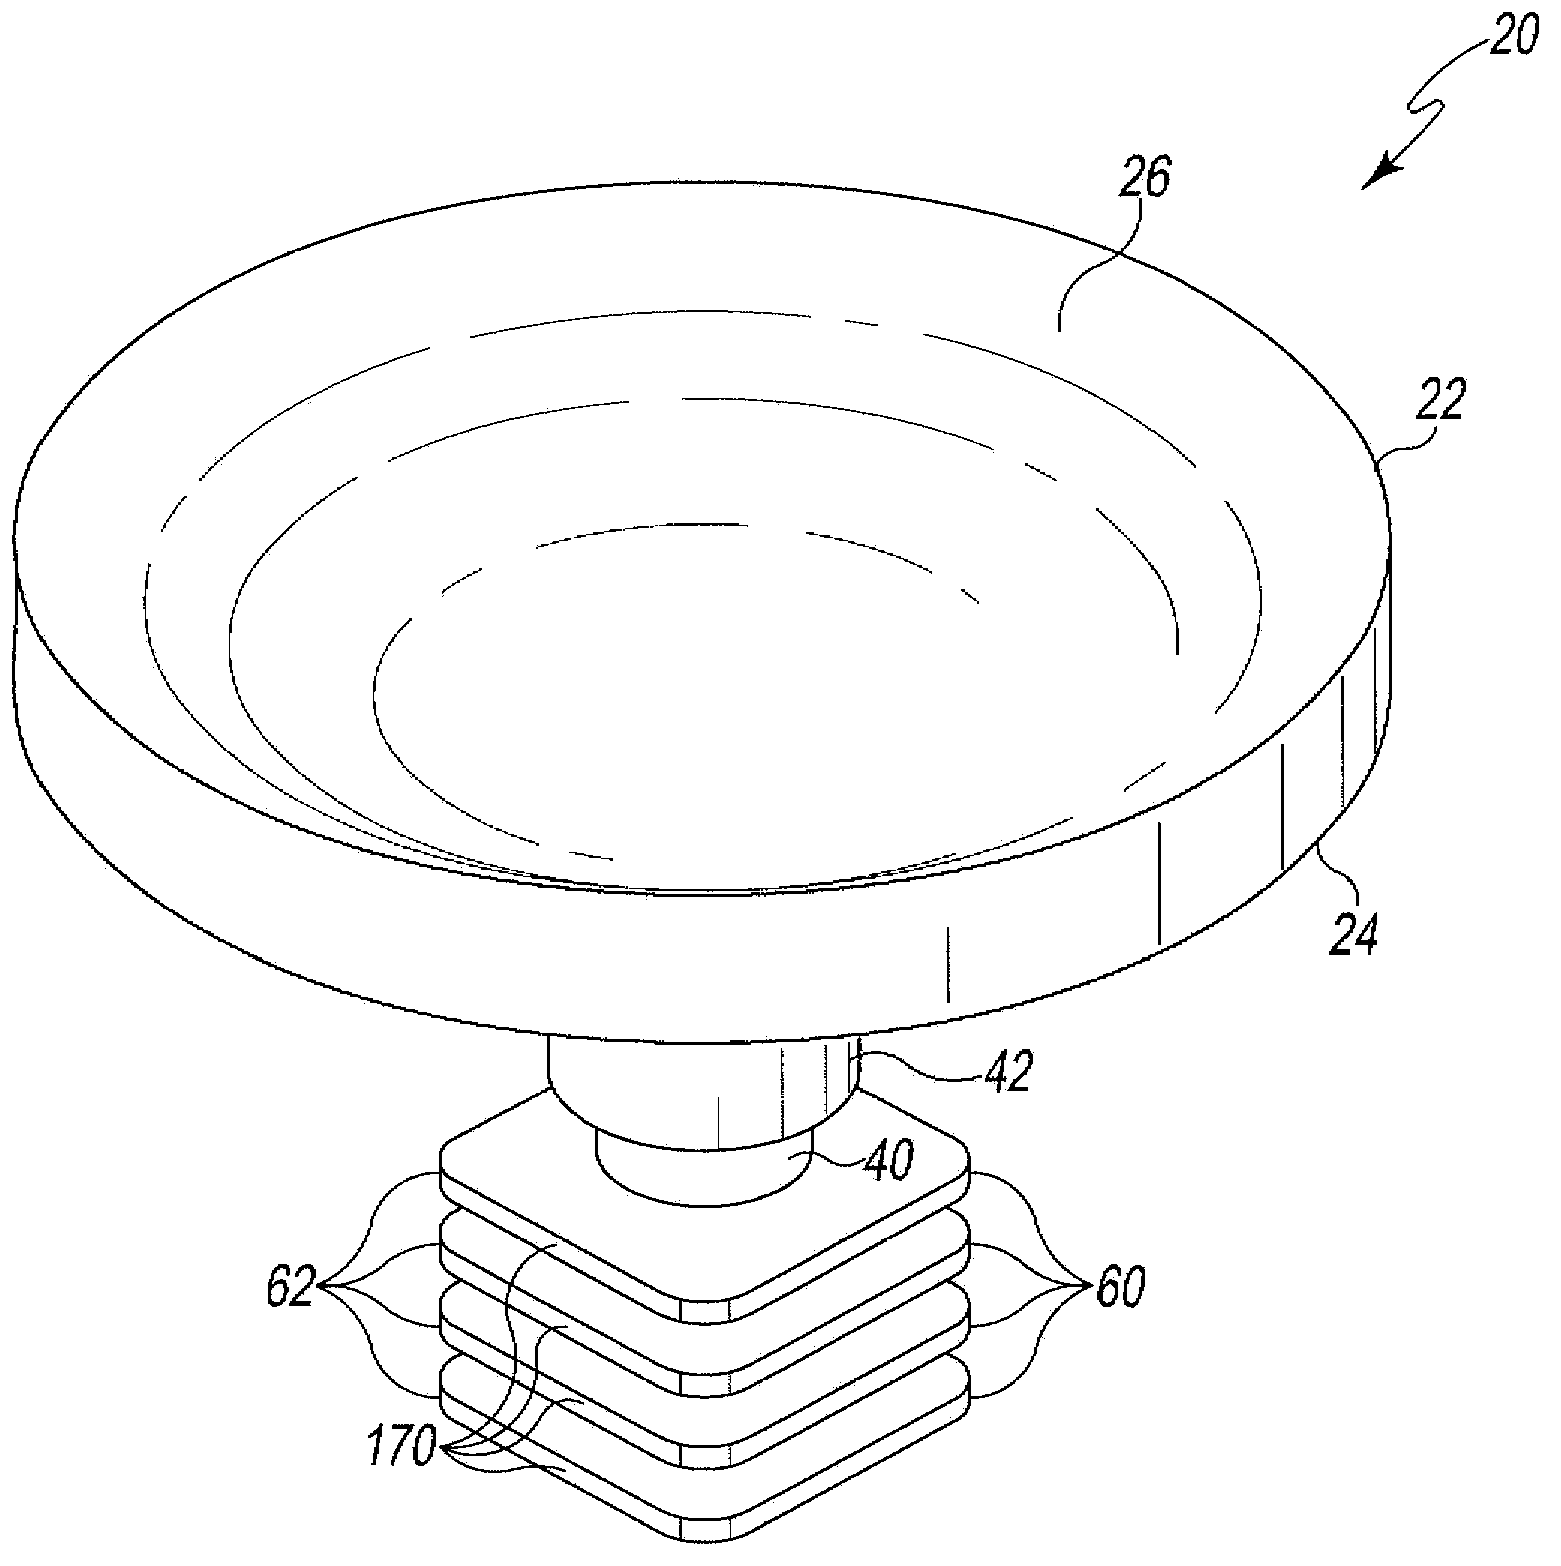 Modified glenoid components and methods of installing same